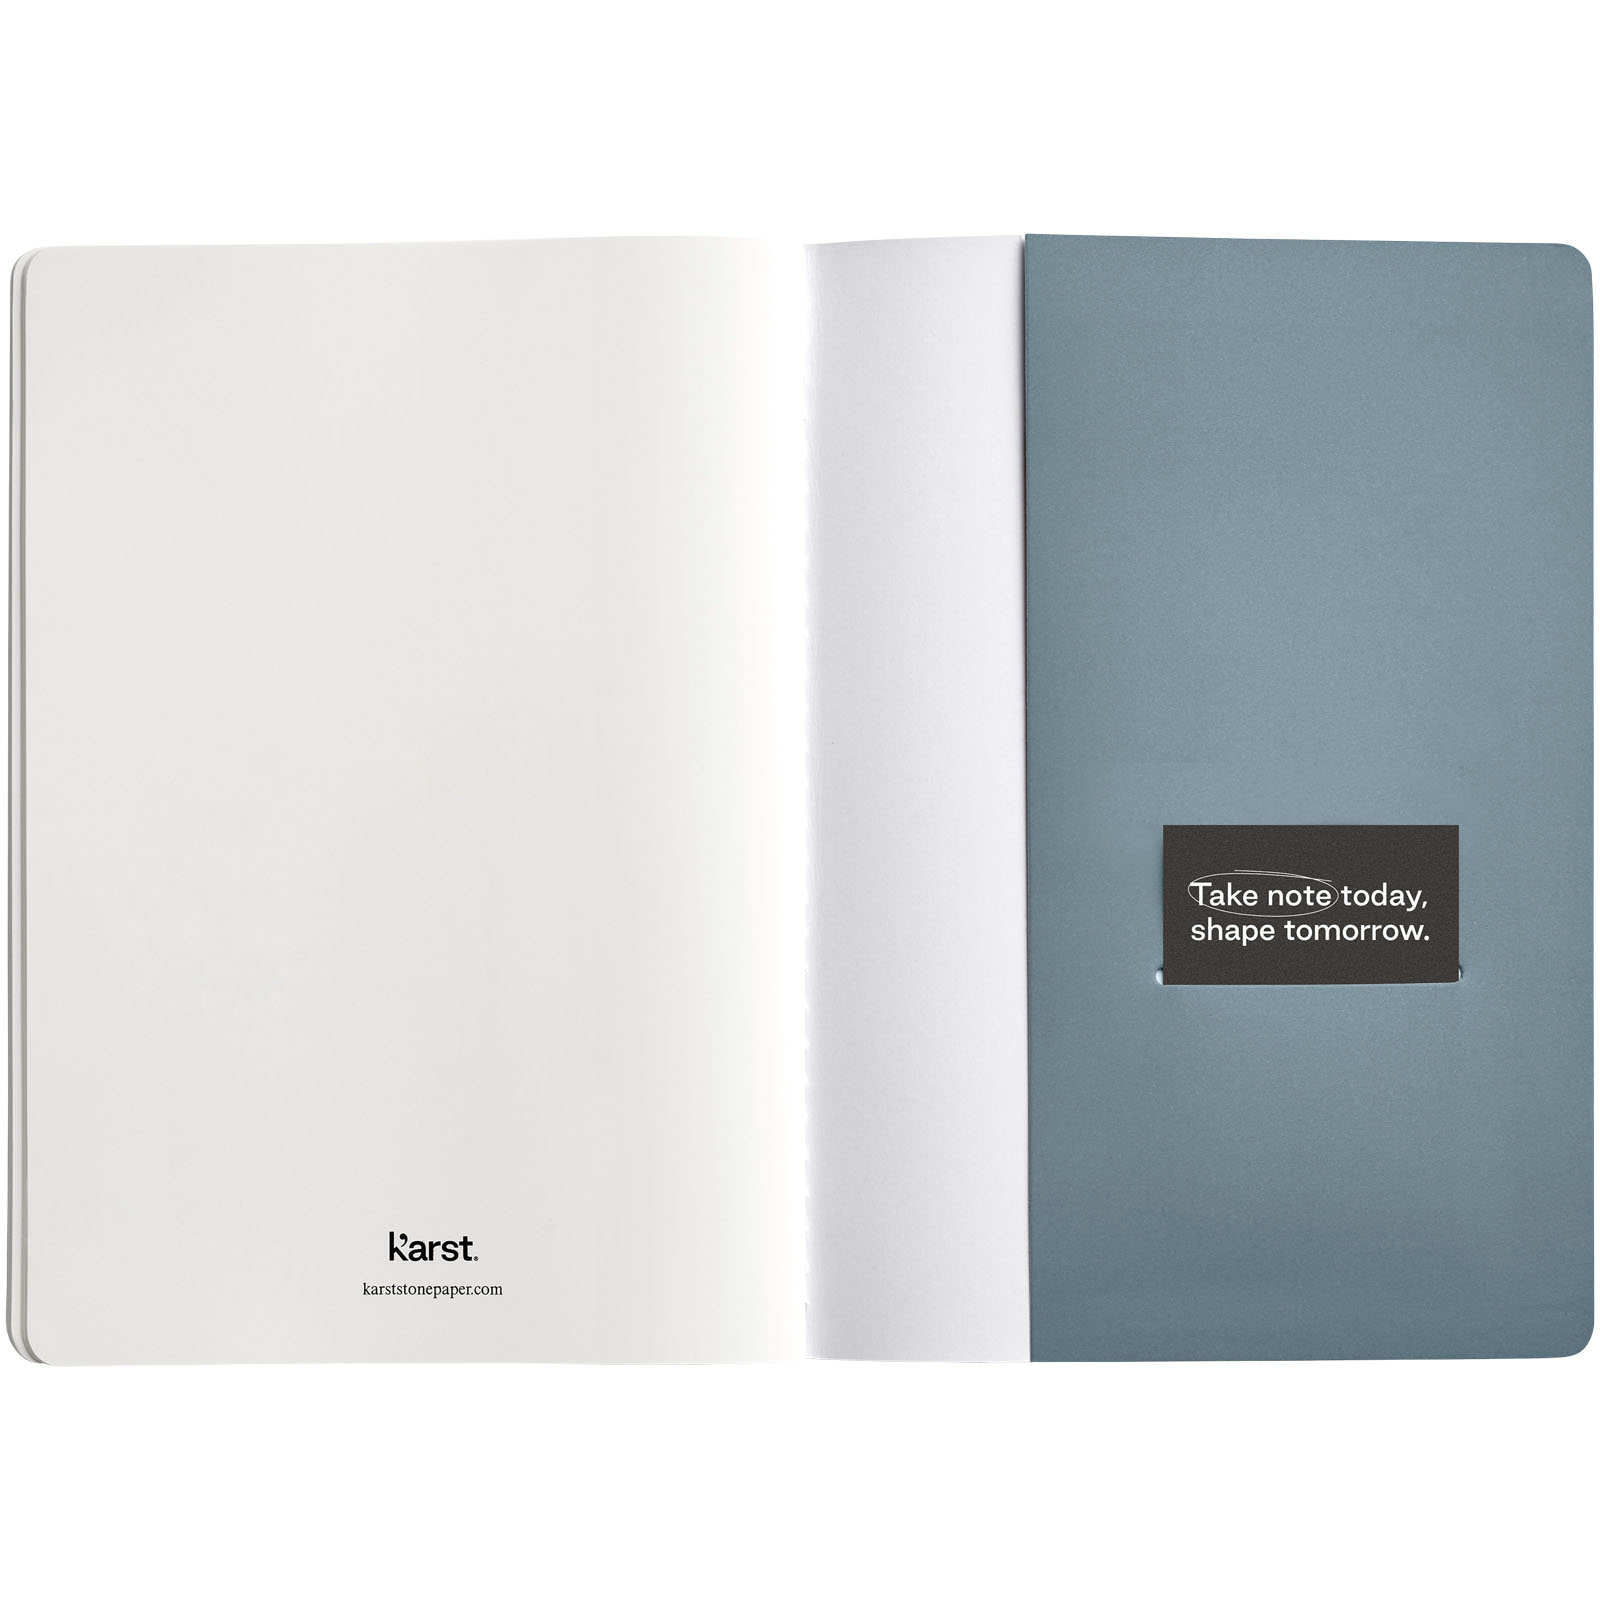 Advertising Hard cover notebooks - Karst® A5 stone paper journal twin pack - 4